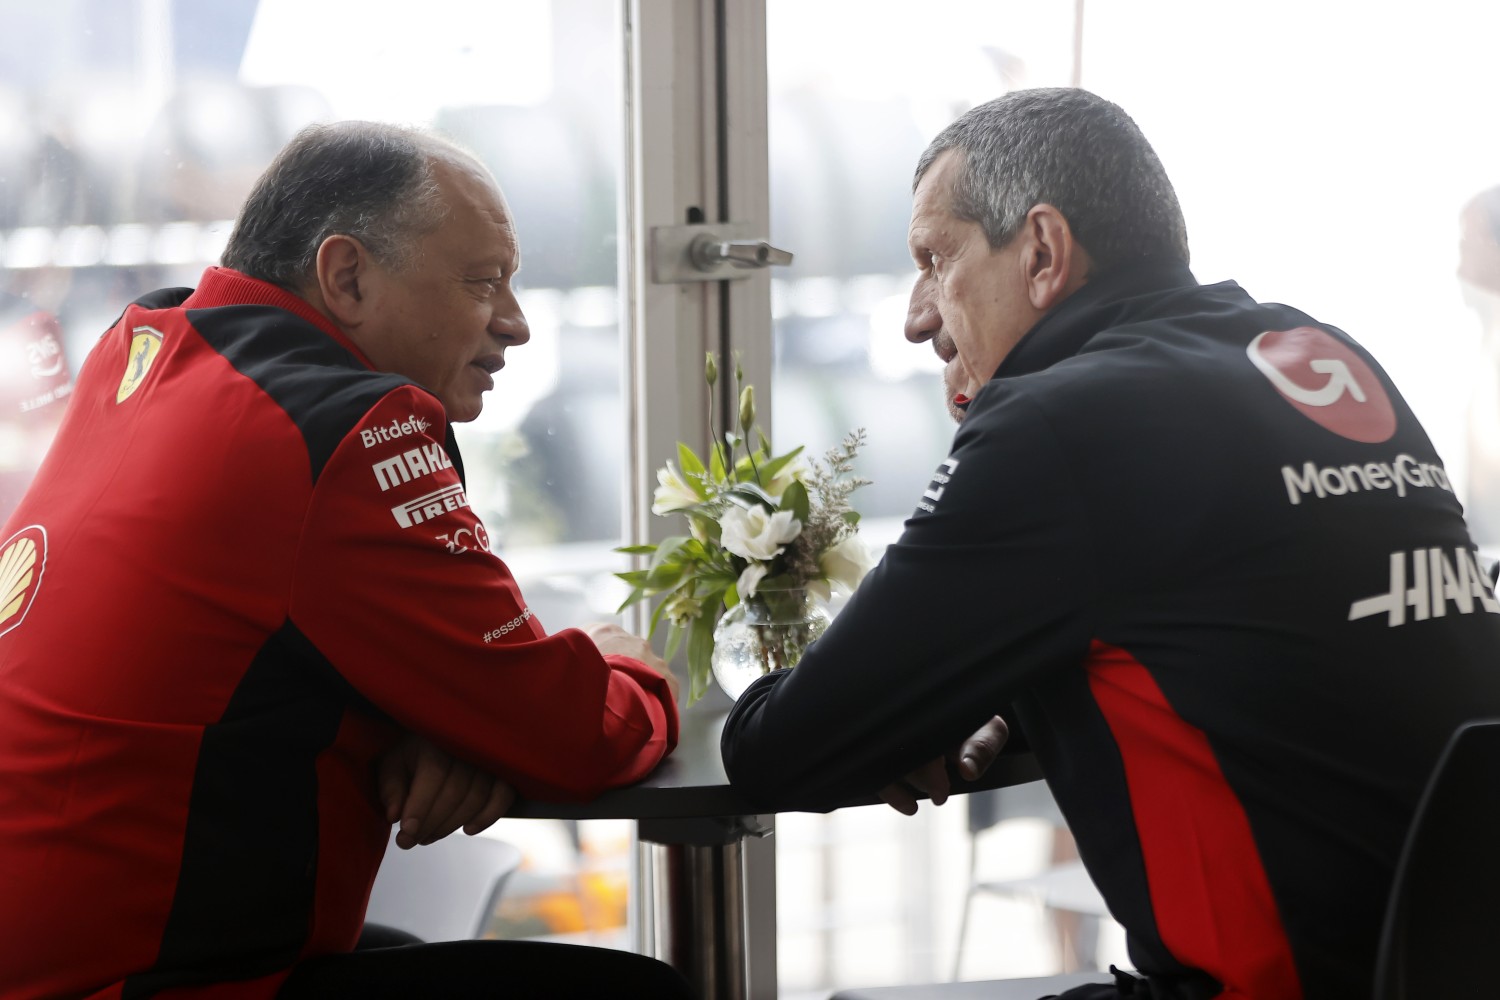 Frederic Vasseur, Team Principal and General Manager, Scuderia Ferrari and Guenther Steiner, Team Principal, Haas F1 Team during the Mexico City GP at Autodromo Hermanos Rodriguez on Thursday October 26, 2023 in Mexico City, Mexico. (Photo by Andy Hone / LAT Images)